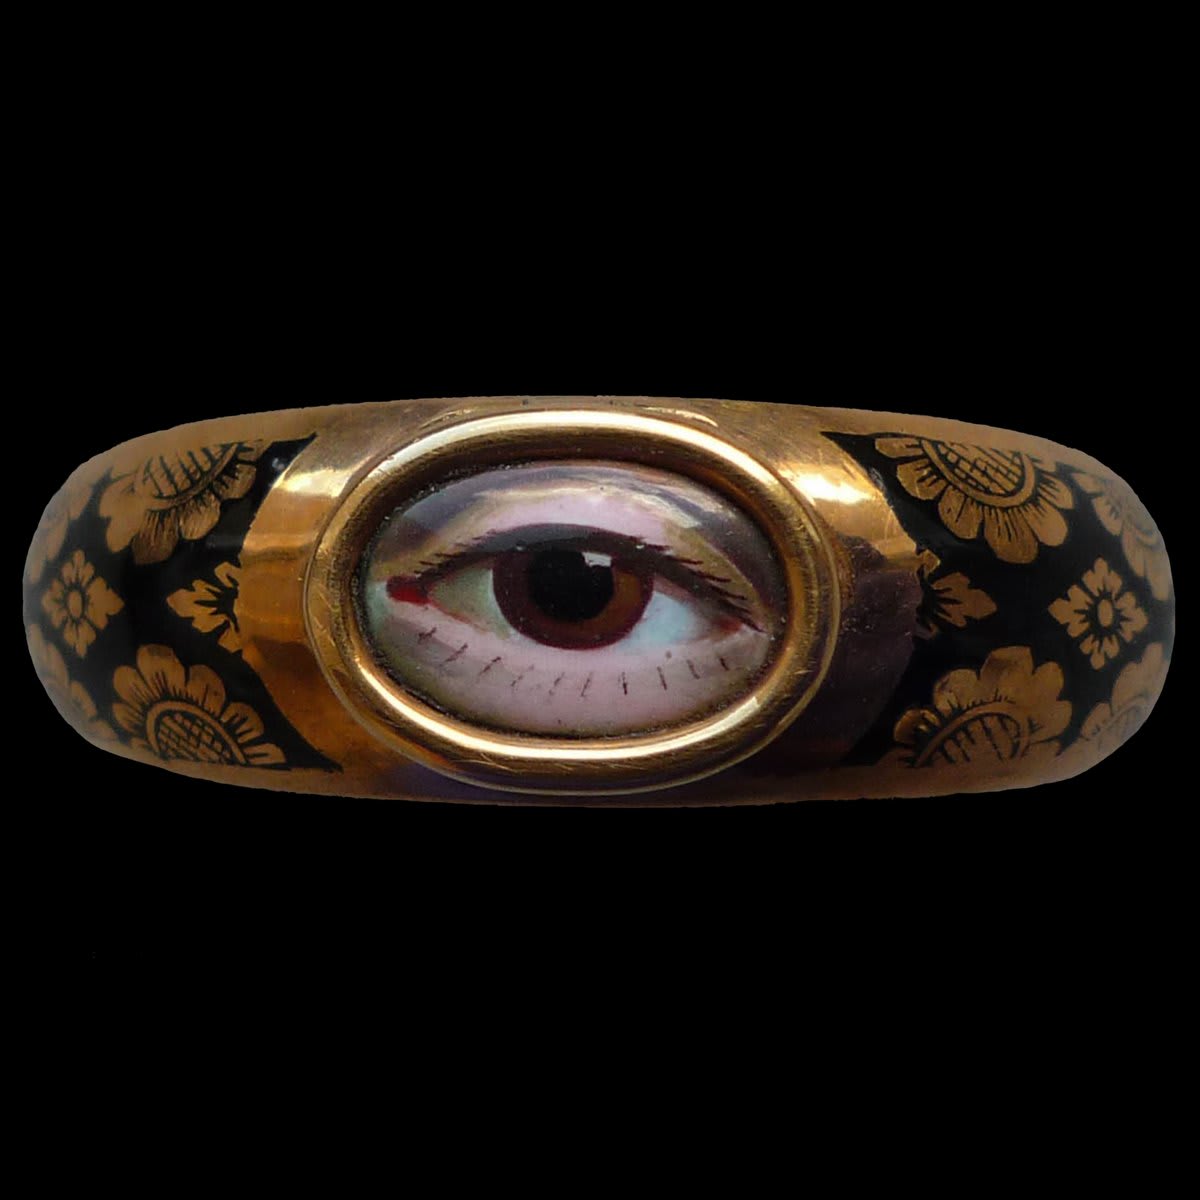 👁 Let’s take a closer look at this intriguing mourning ring 👁 The enamelled eye opens up to reveal a secret locket, and the band of the ring is hollow so the hair of the deceased could be stored inside 🔎🔗